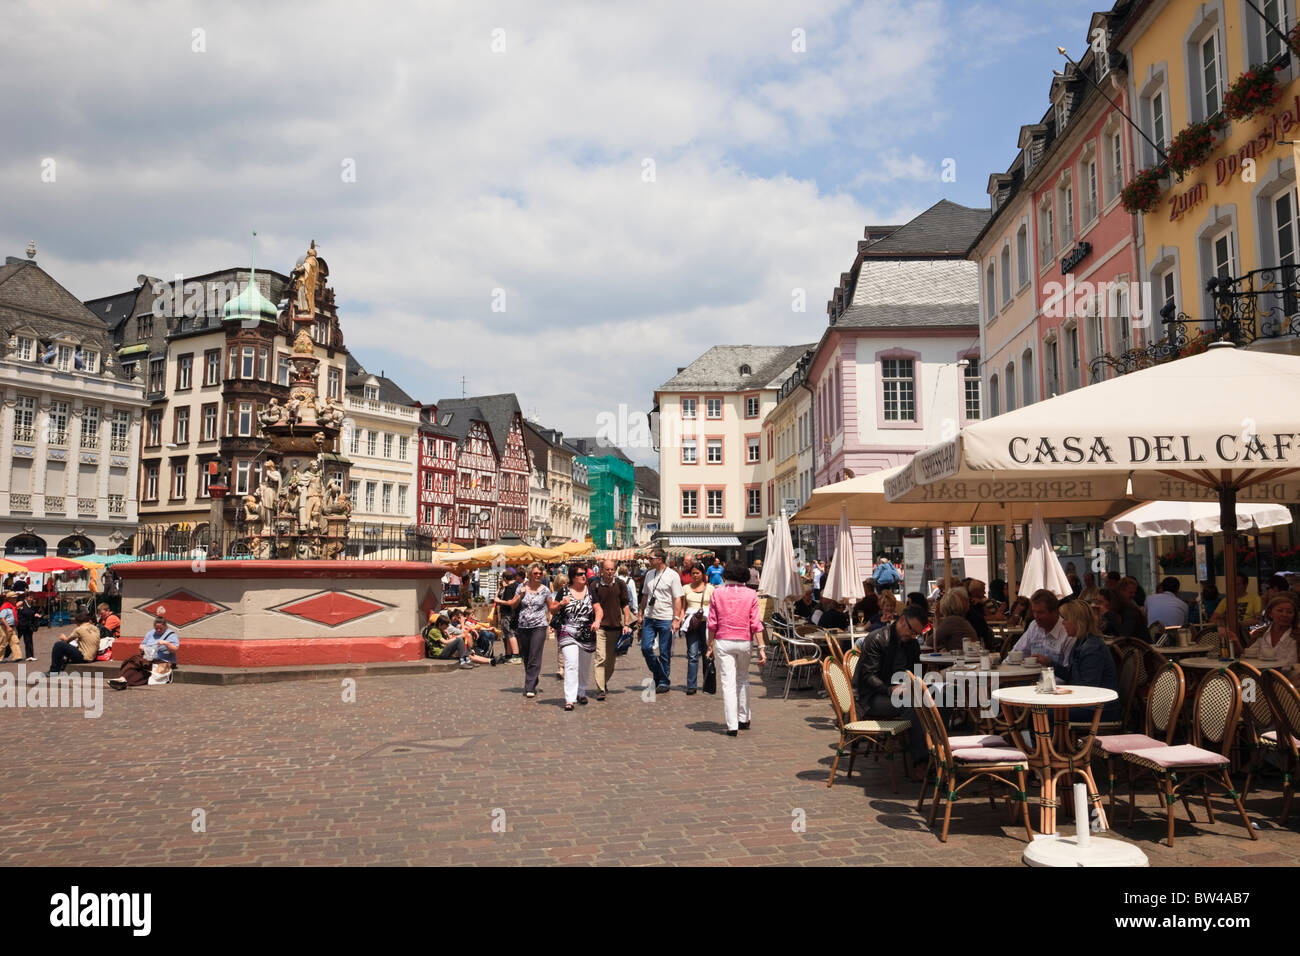 Hauptmarkt (Market Place), Trier, Rhineland-Palatinate, Germany. Street cafe in the historic main square in oldest German city Stock Photo